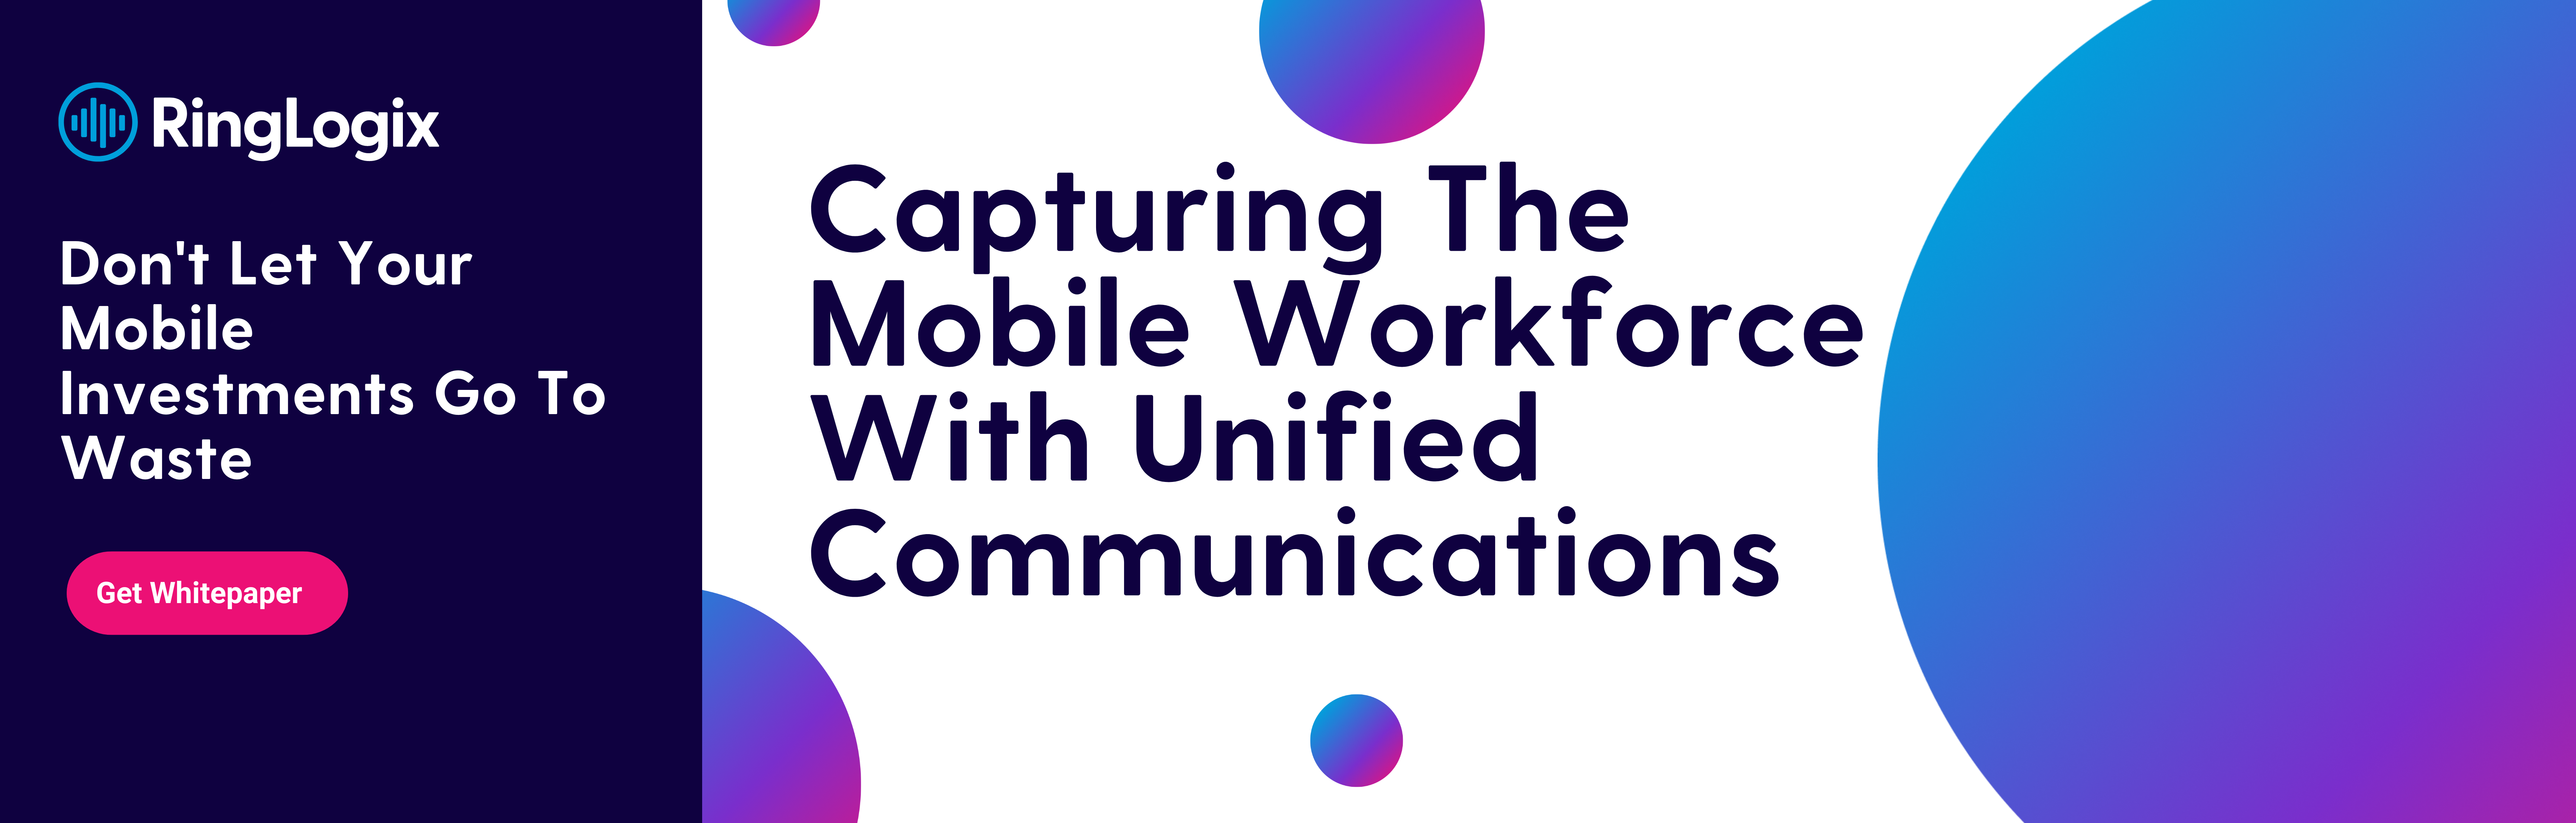 Capturing The Mobile Workforce With Unified Communications (1)